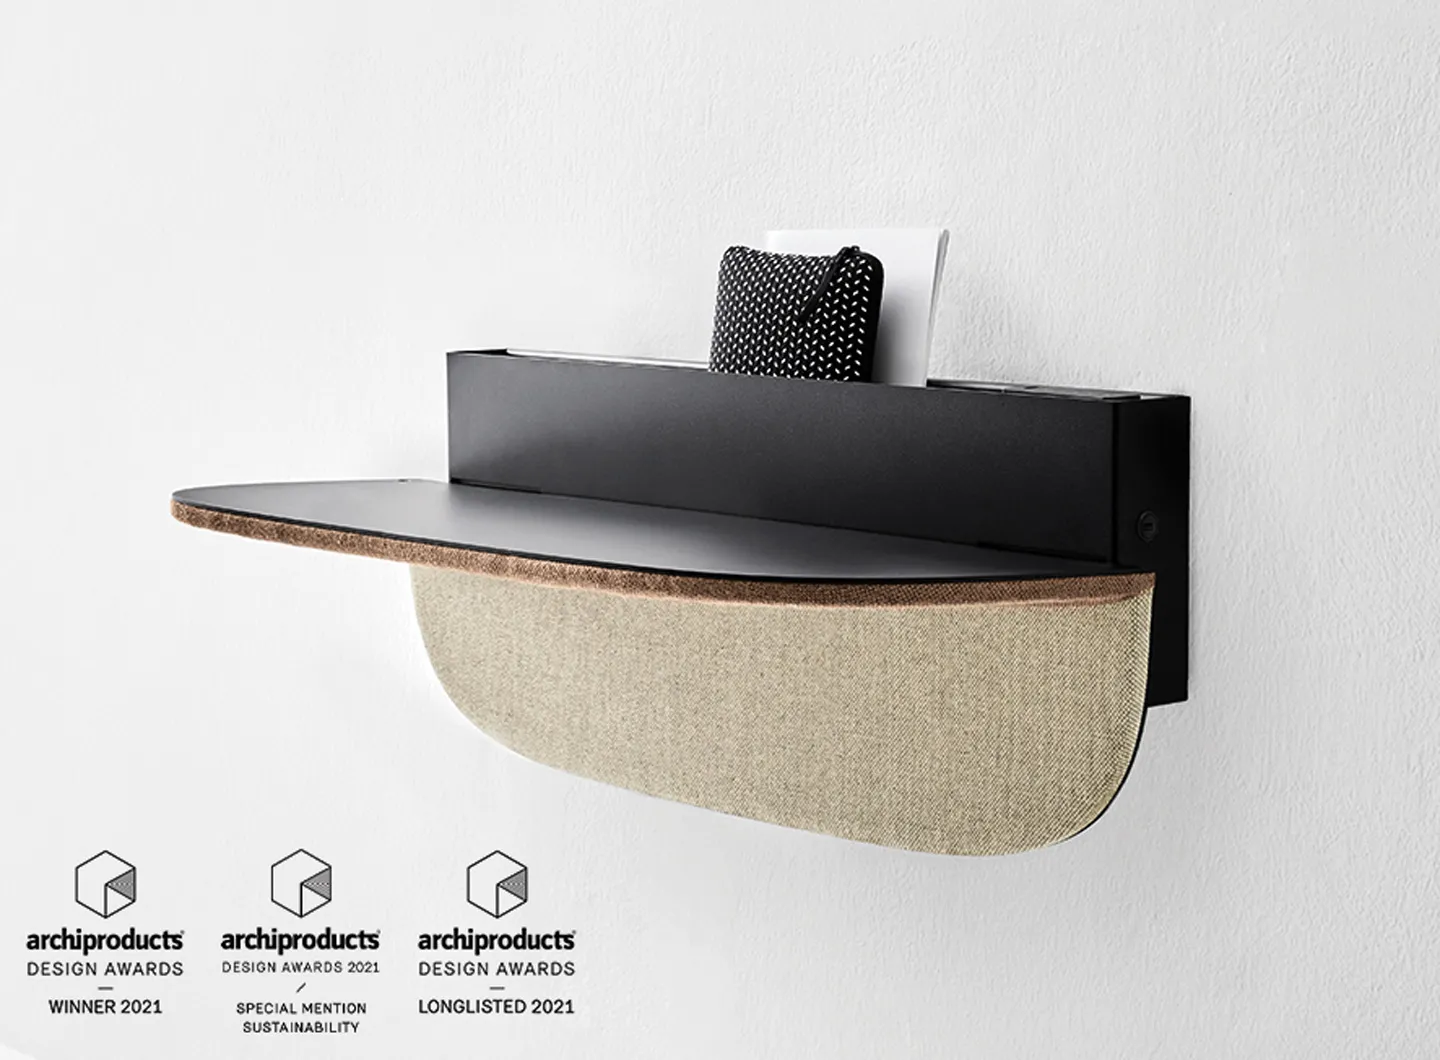 archiproducts winner 2021 dune